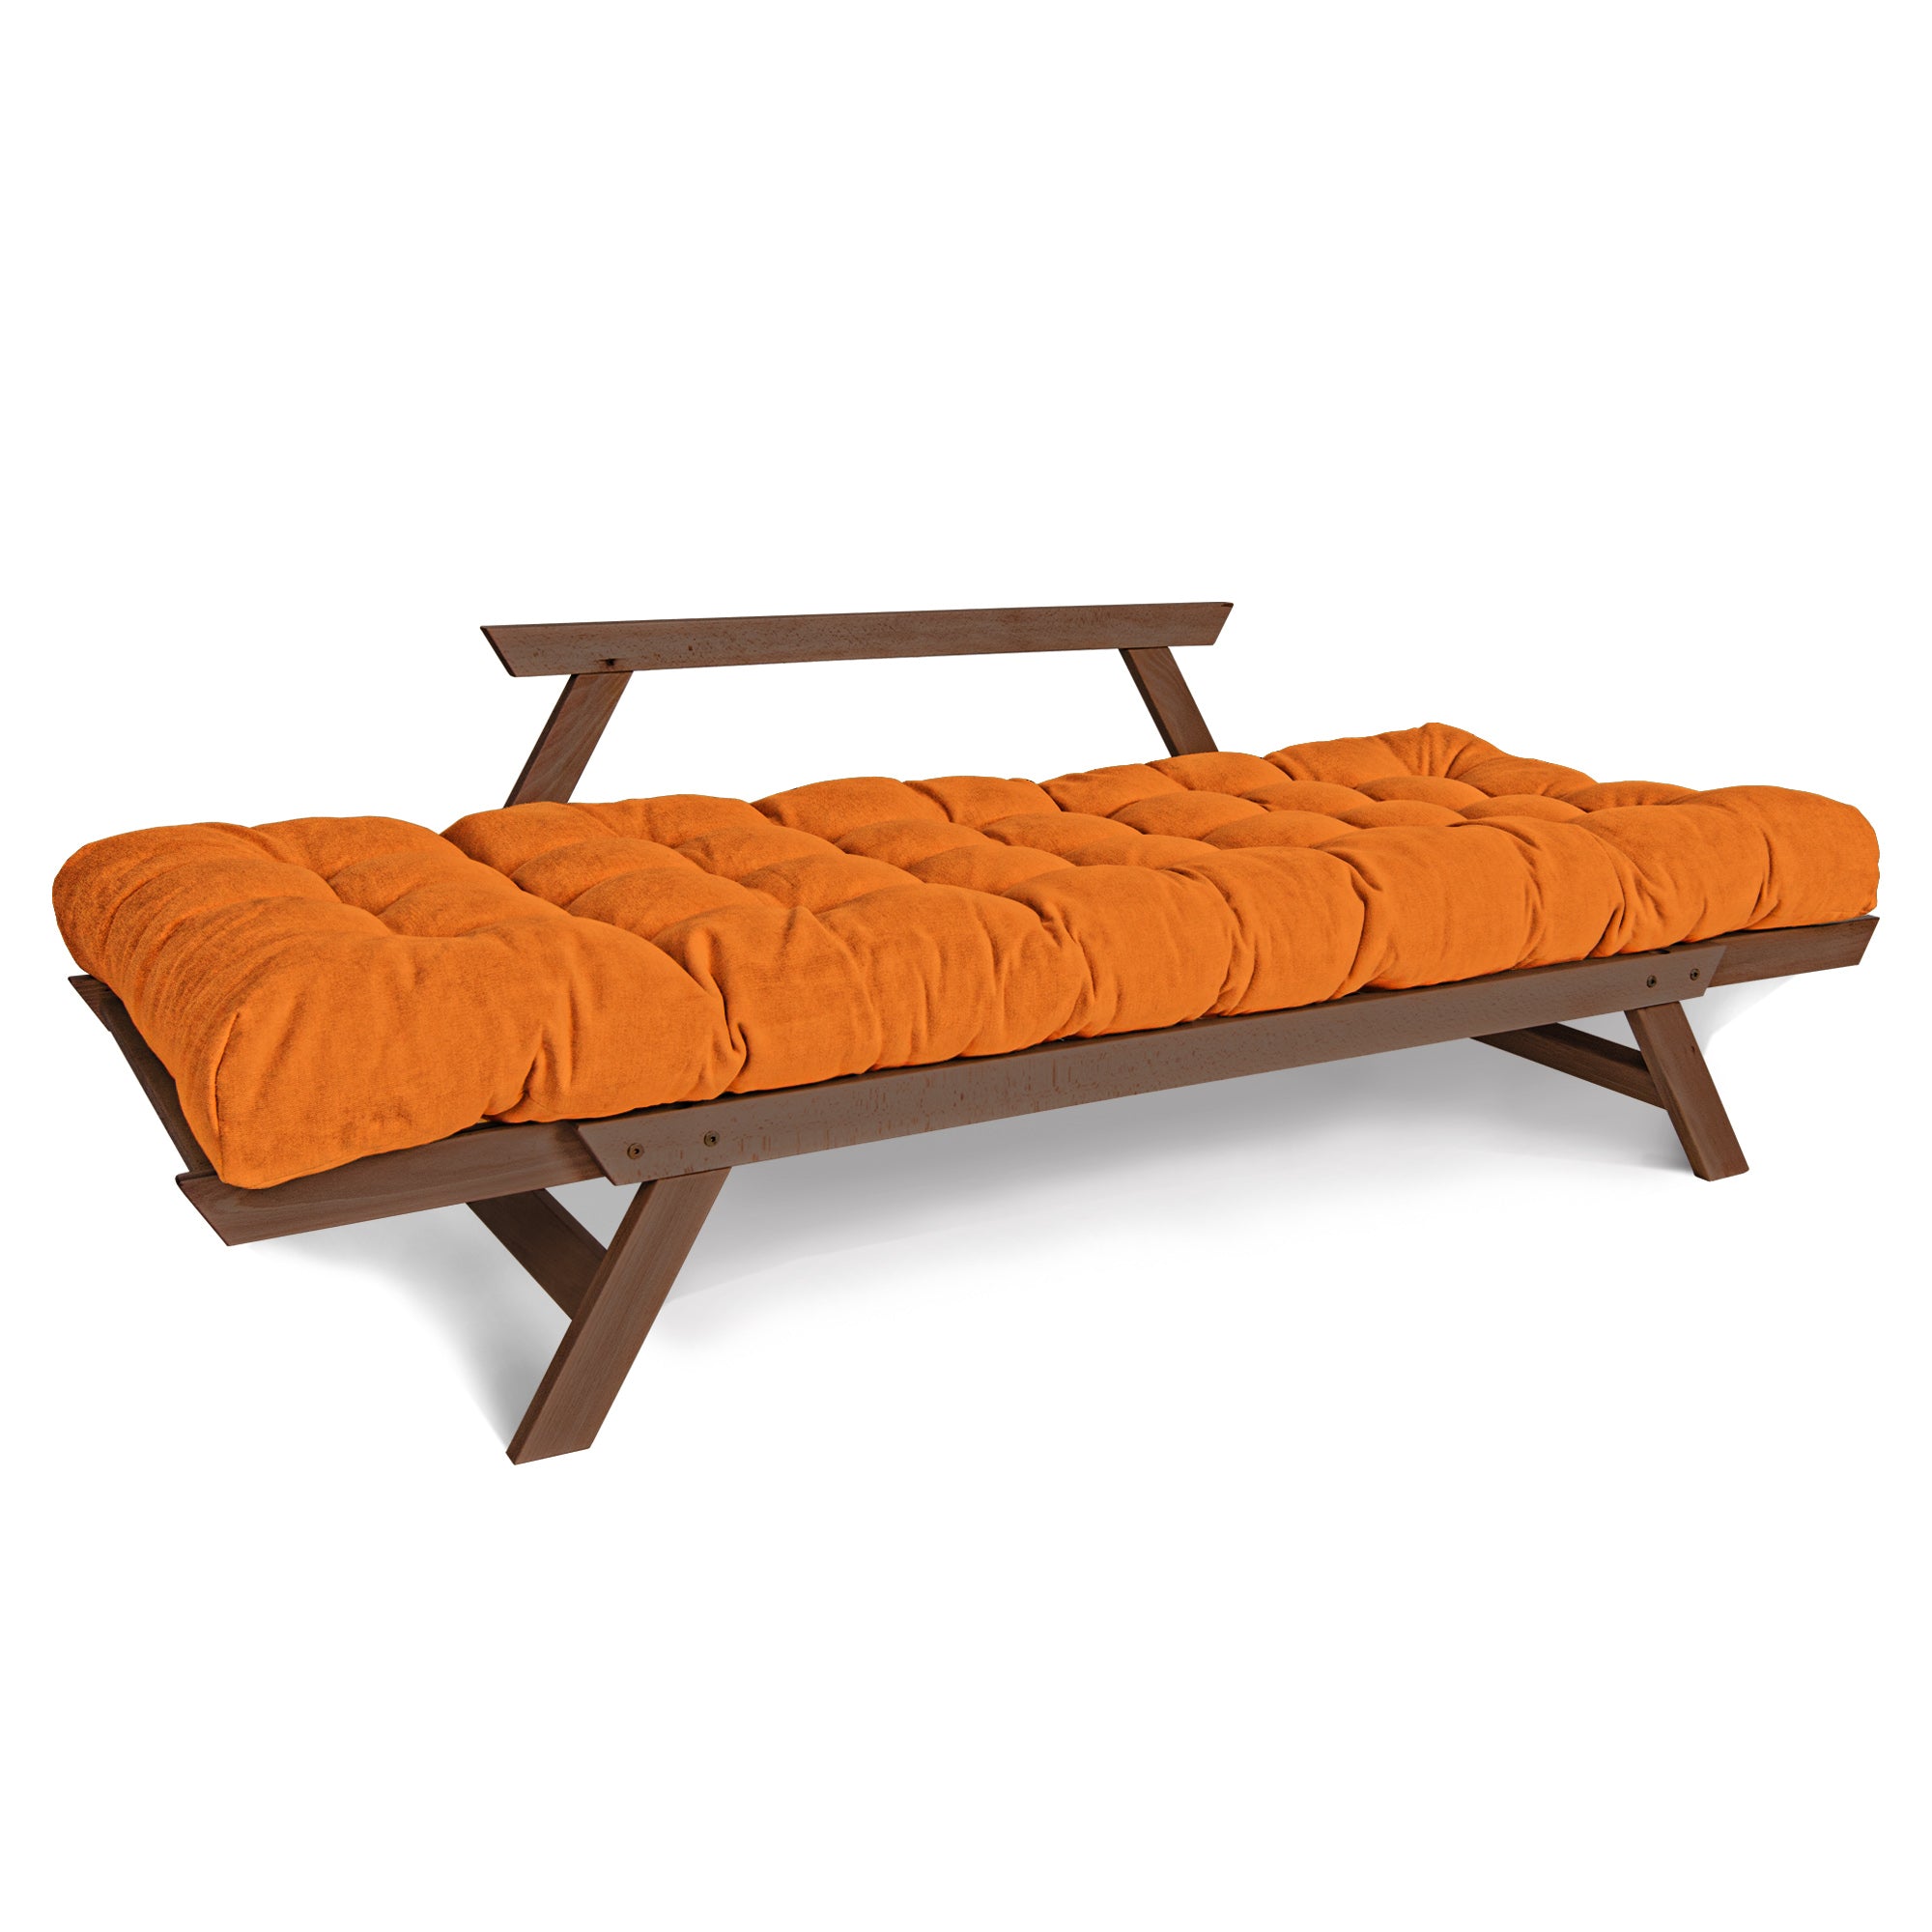 ALLEGRO Folding Futon Couch, Beech Wood Frame, Brown